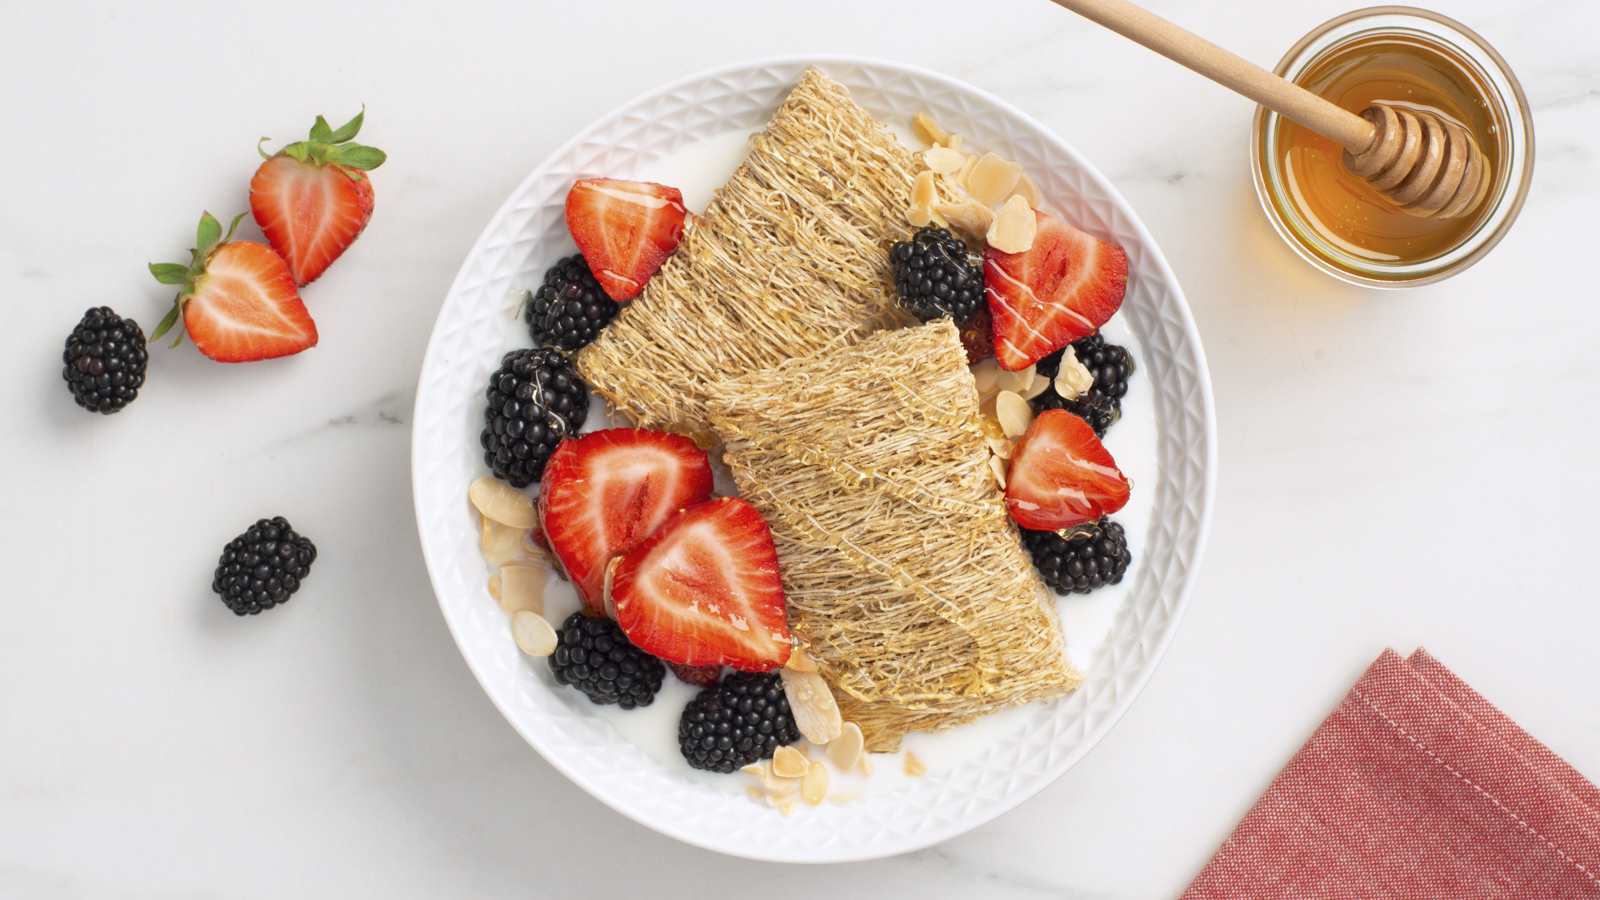 Shredded Wheat biscuits in a bowl with honey, strawberries and blackberries on top.